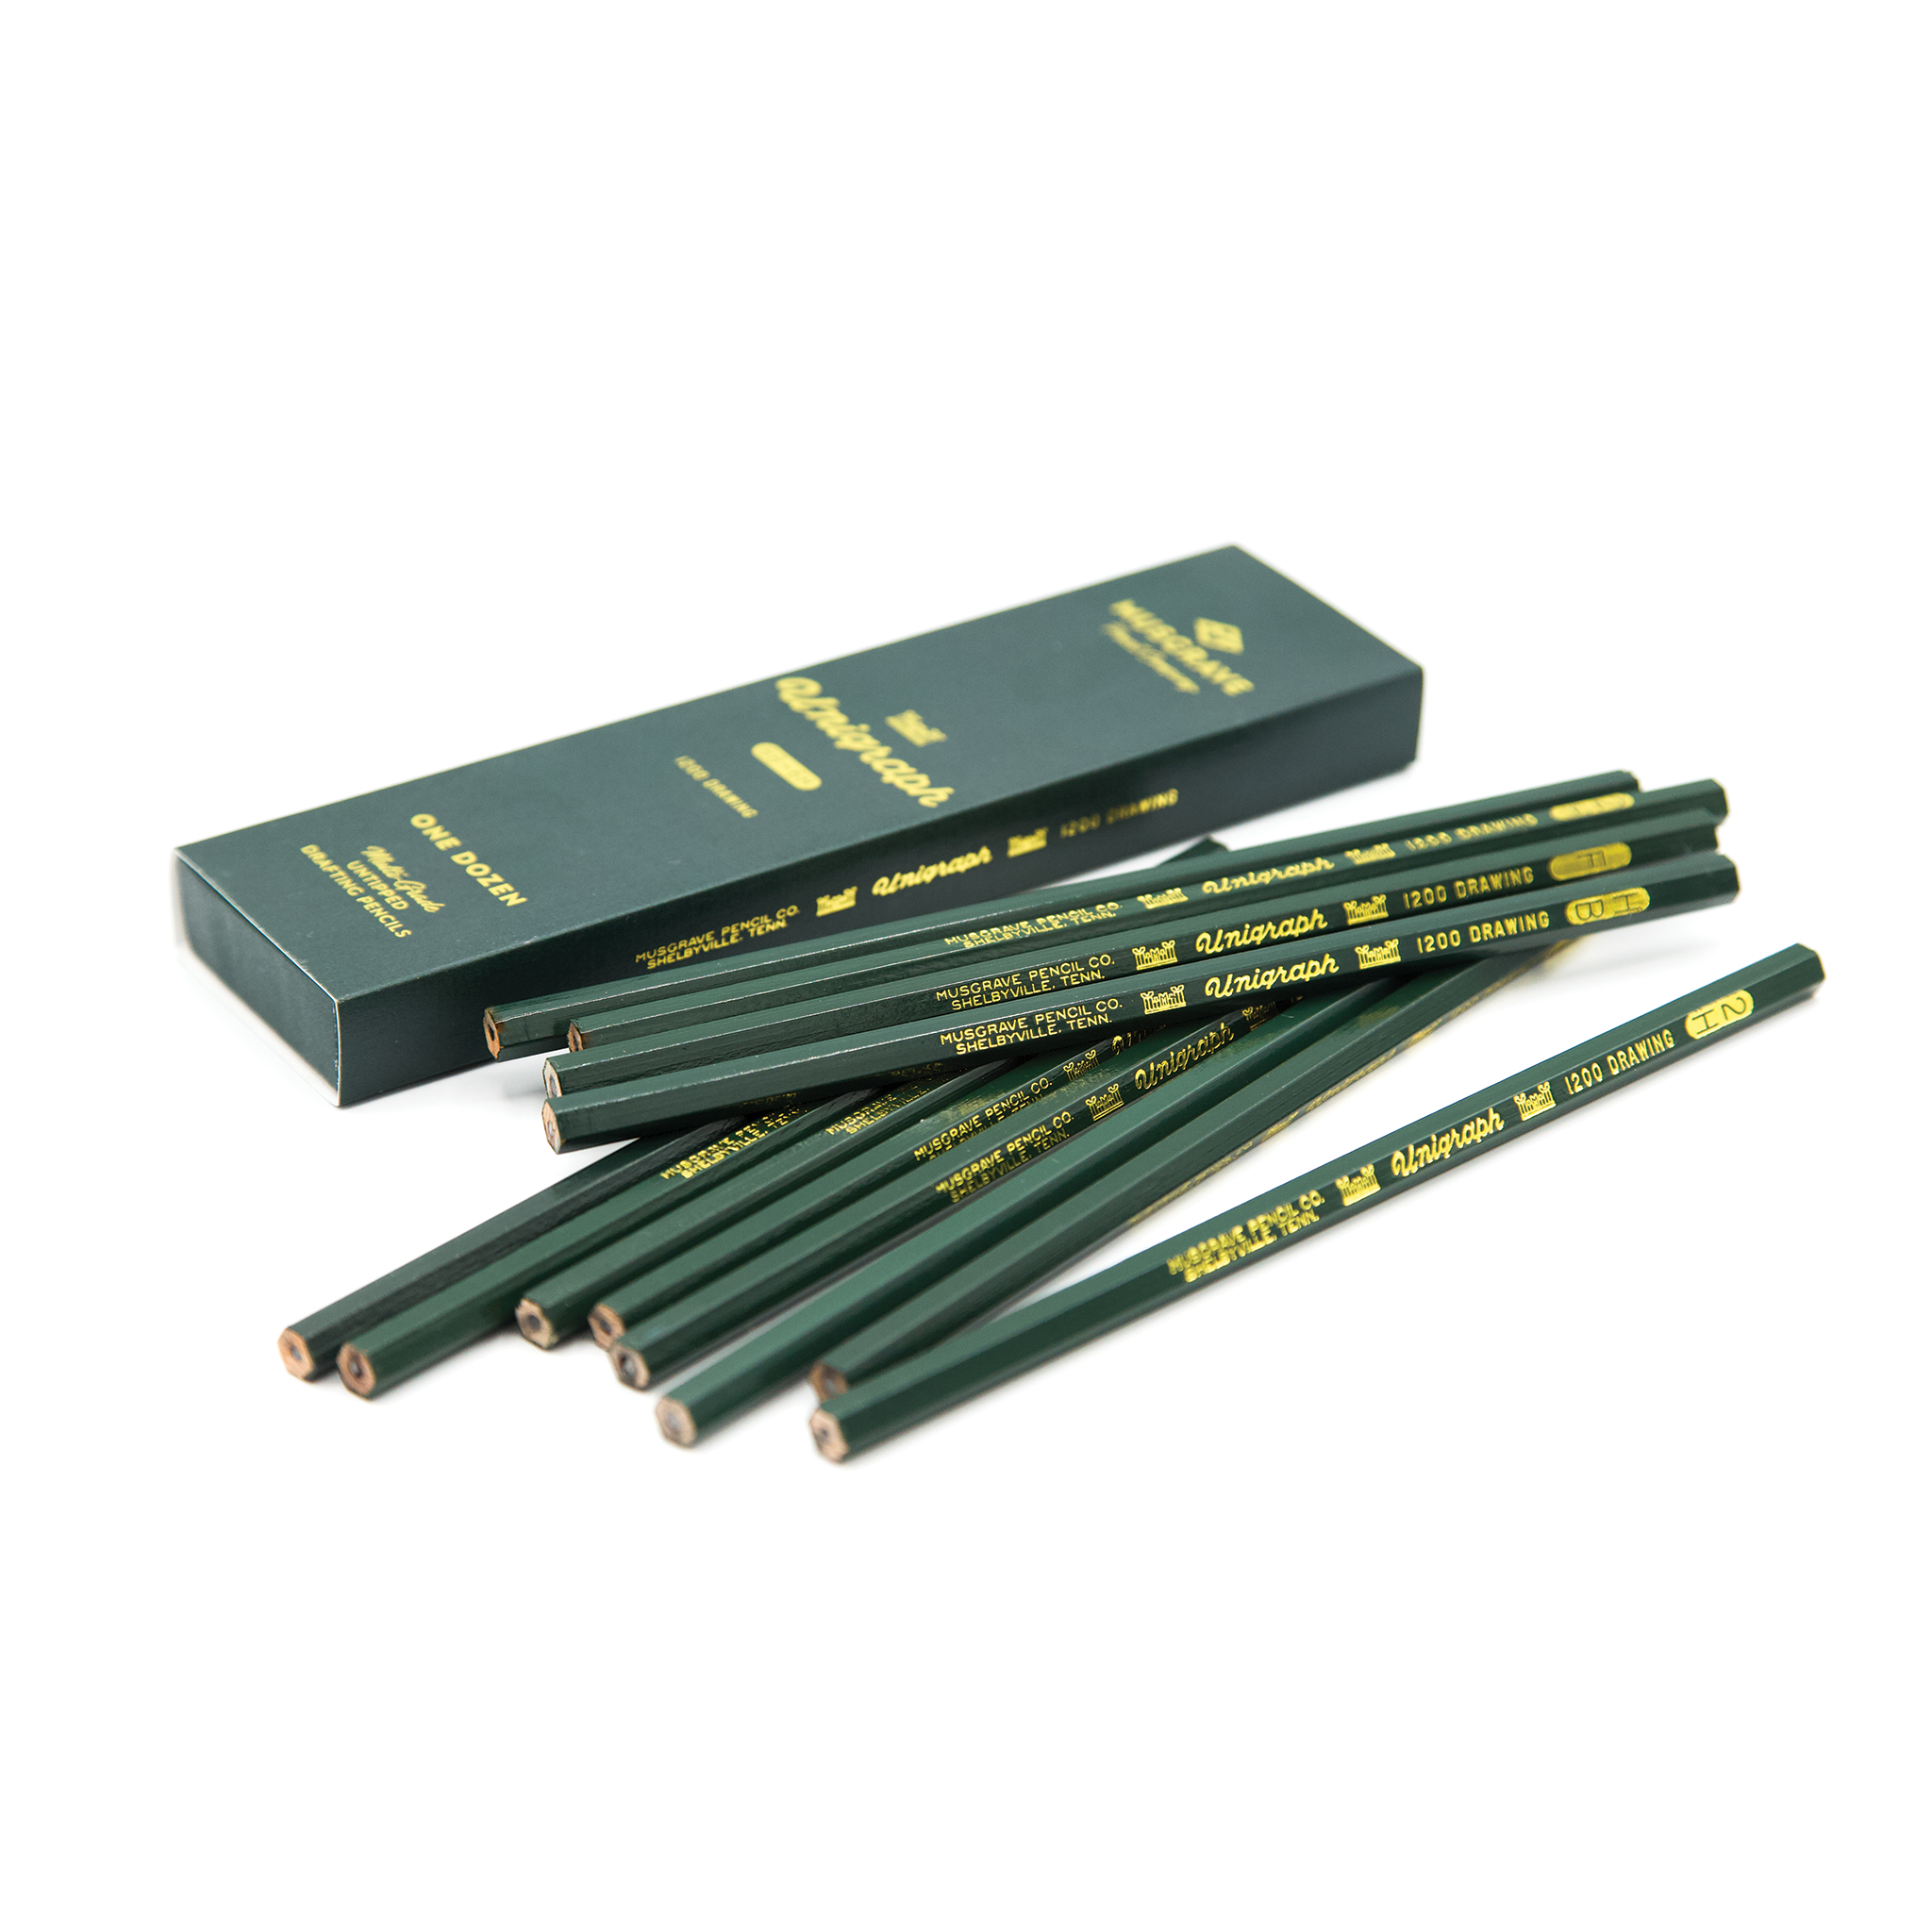 Unigraph Variety Pack of 12 (6B-6H) by Musgrave Pencil Company